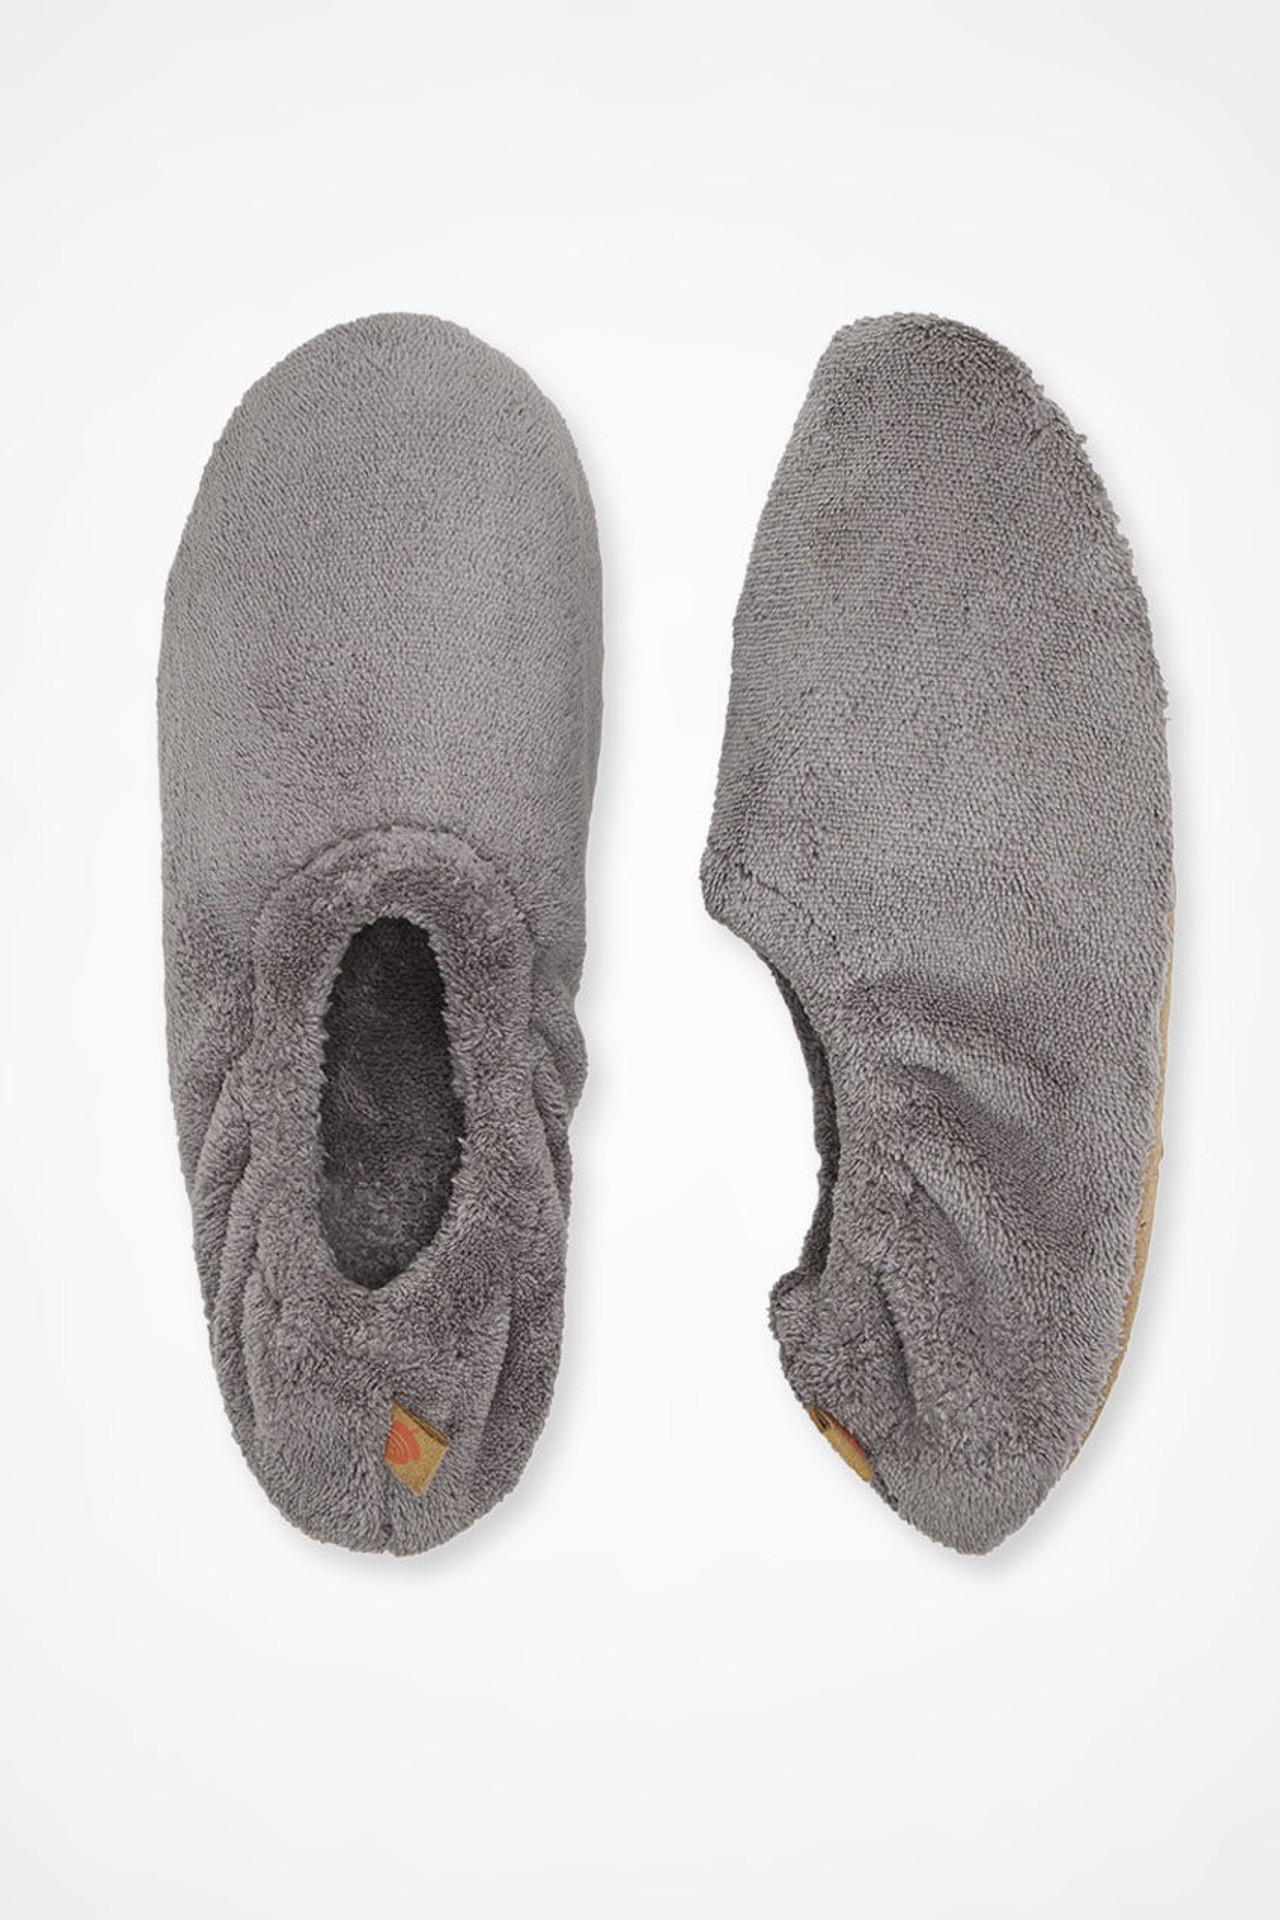 “Spa” Travel Slippers by Acorn®